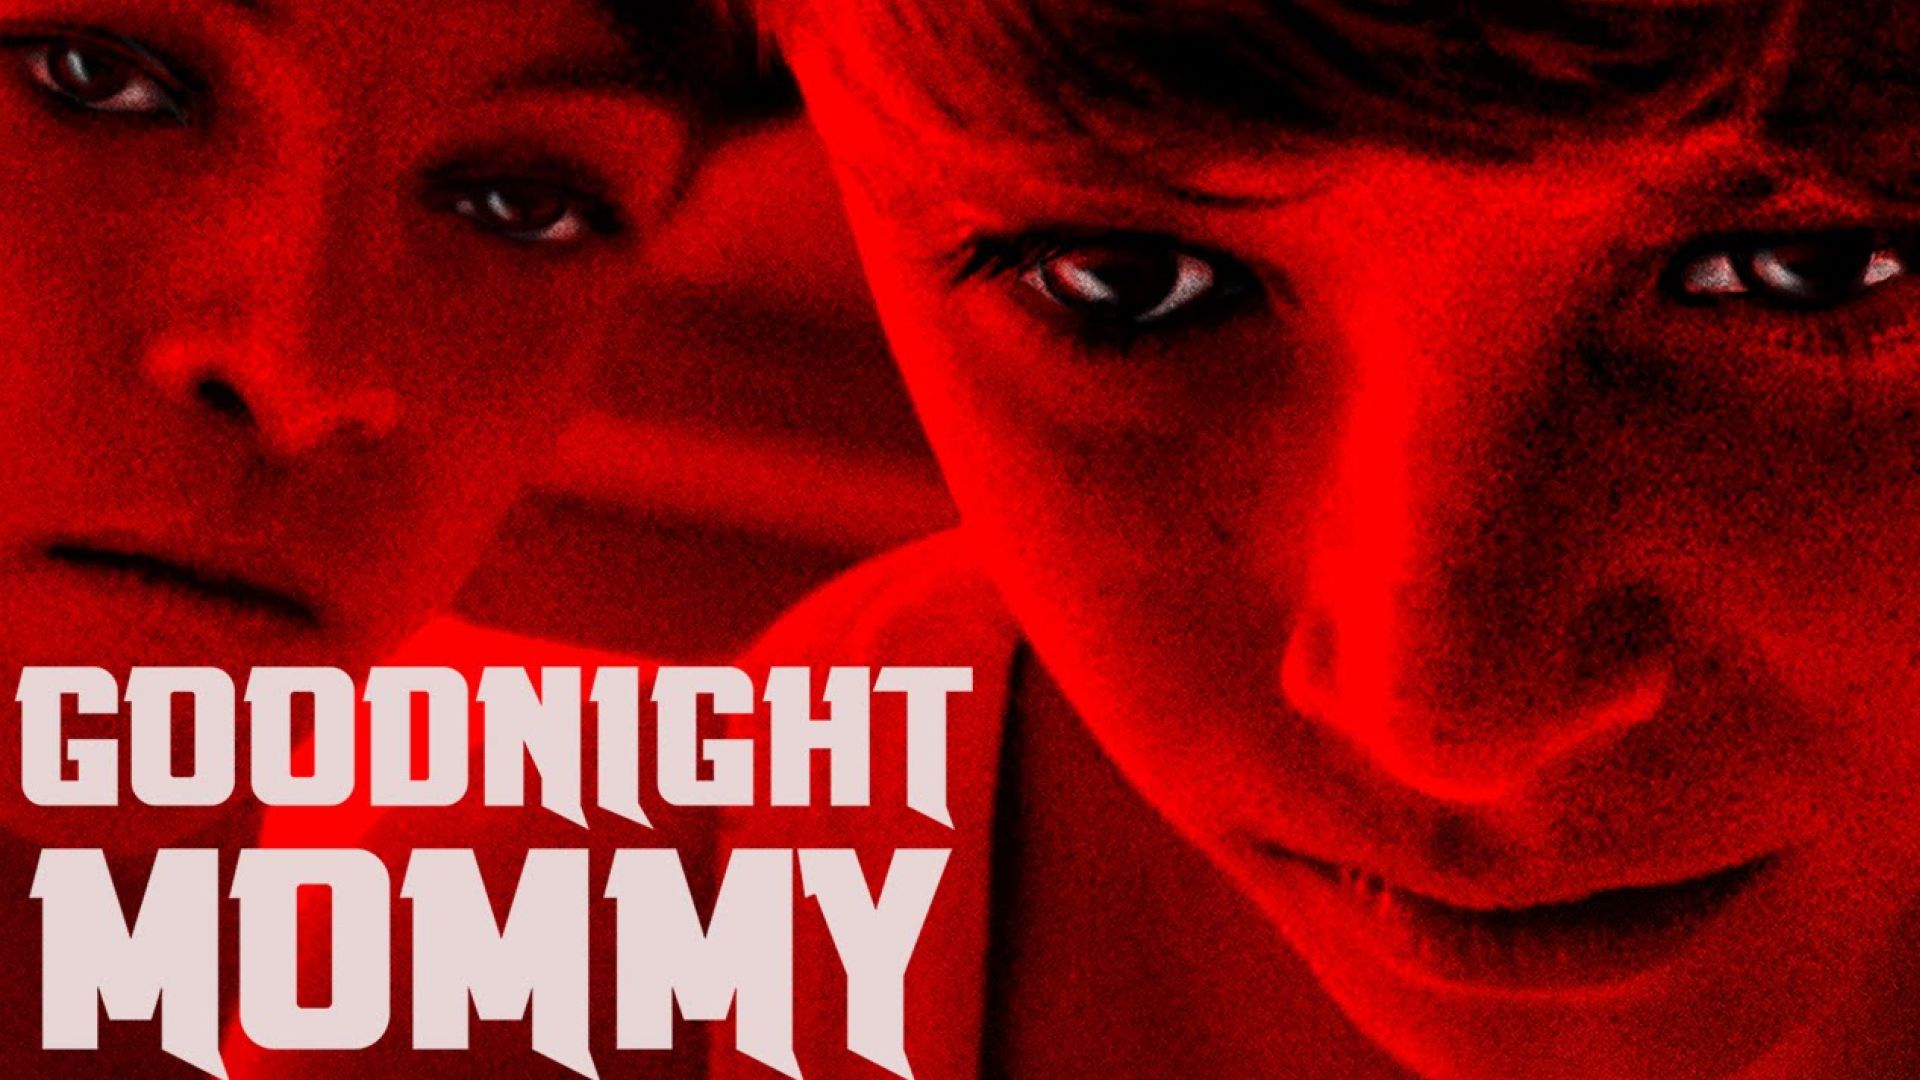 Goodnight Mommy Trailer Dubbed Scariest Trailer Of All Time Cultjer